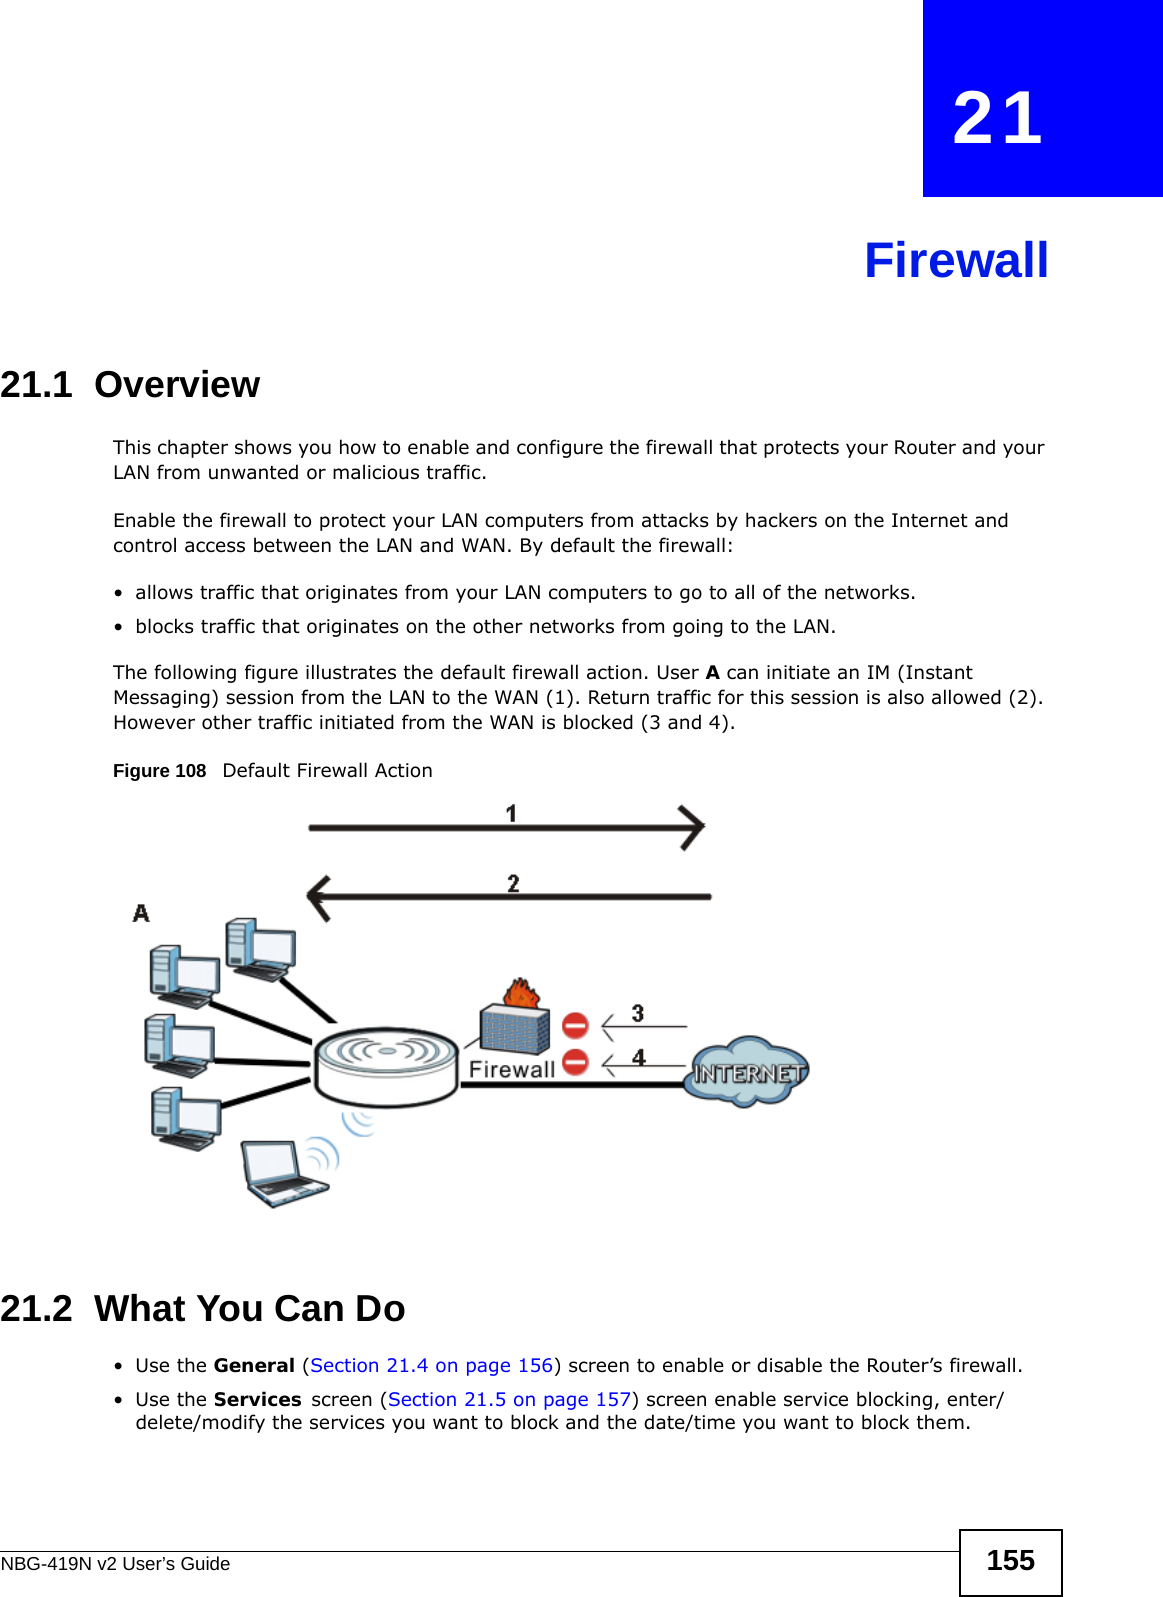 NBG-419N v2 User’s Guide 155CHAPTER   21Firewall21.1  Overview   This chapter shows you how to enable and configure the firewall that protects your Router and your LAN from unwanted or malicious traffic.Enable the firewall to protect your LAN computers from attacks by hackers on the Internet and control access between the LAN and WAN. By default the firewall:• allows traffic that originates from your LAN computers to go to all of the networks. • blocks traffic that originates on the other networks from going to the LAN. The following figure illustrates the default firewall action. User A can initiate an IM (Instant Messaging) session from the LAN to the WAN (1). Return traffic for this session is also allowed (2). However other traffic initiated from the WAN is blocked (3 and 4).Figure 108   Default Firewall Action21.2  What You Can Do•Use the General (Section 21.4 on page 156) screen to enable or disable the Router’s firewall.•Use the Services screen (Section 21.5 on page 157) screen enable service blocking, enter/delete/modify the services you want to block and the date/time you want to block them. 